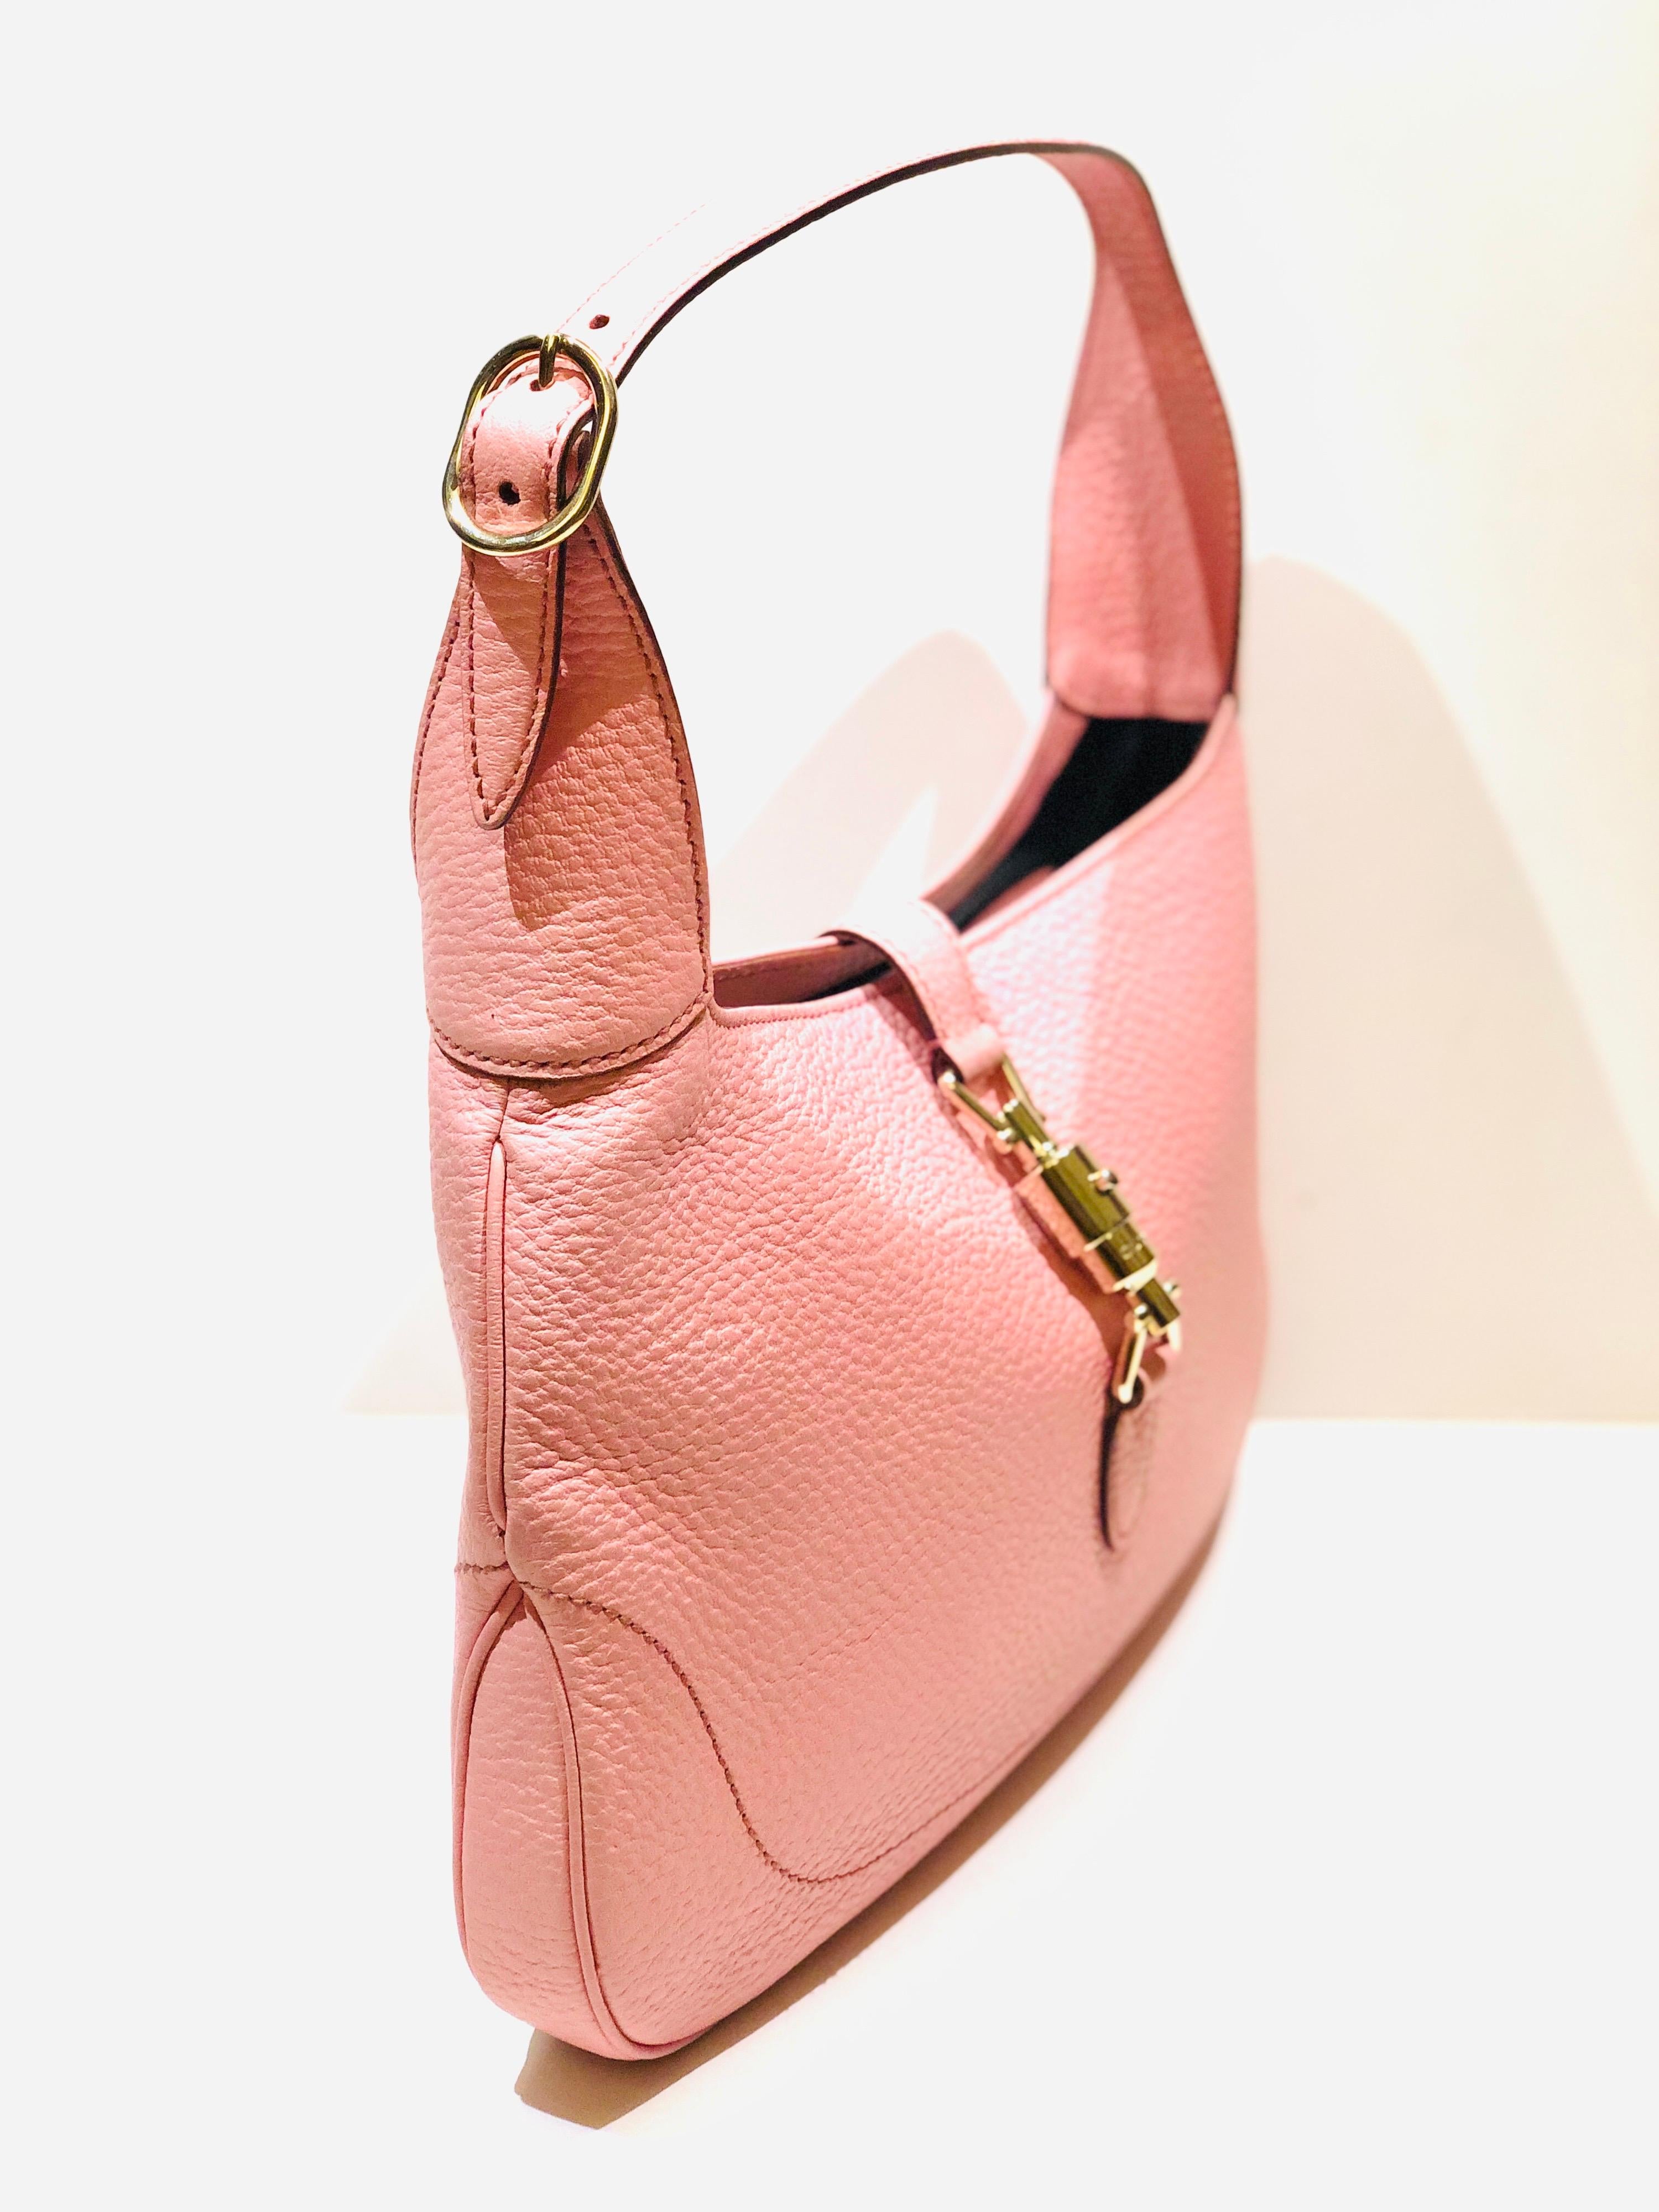 - Gucci pink leather jackie 1961 hobo shoulder bag. You can also carry it like a handbag. 

- Silver-toned hardware. 

- Interior: 1 open pocket and 1 zipper pocket

- Size: Length: 30cm I Height: 20cm I Width: 3cm. Handle Drop: 18cm to 22cm.